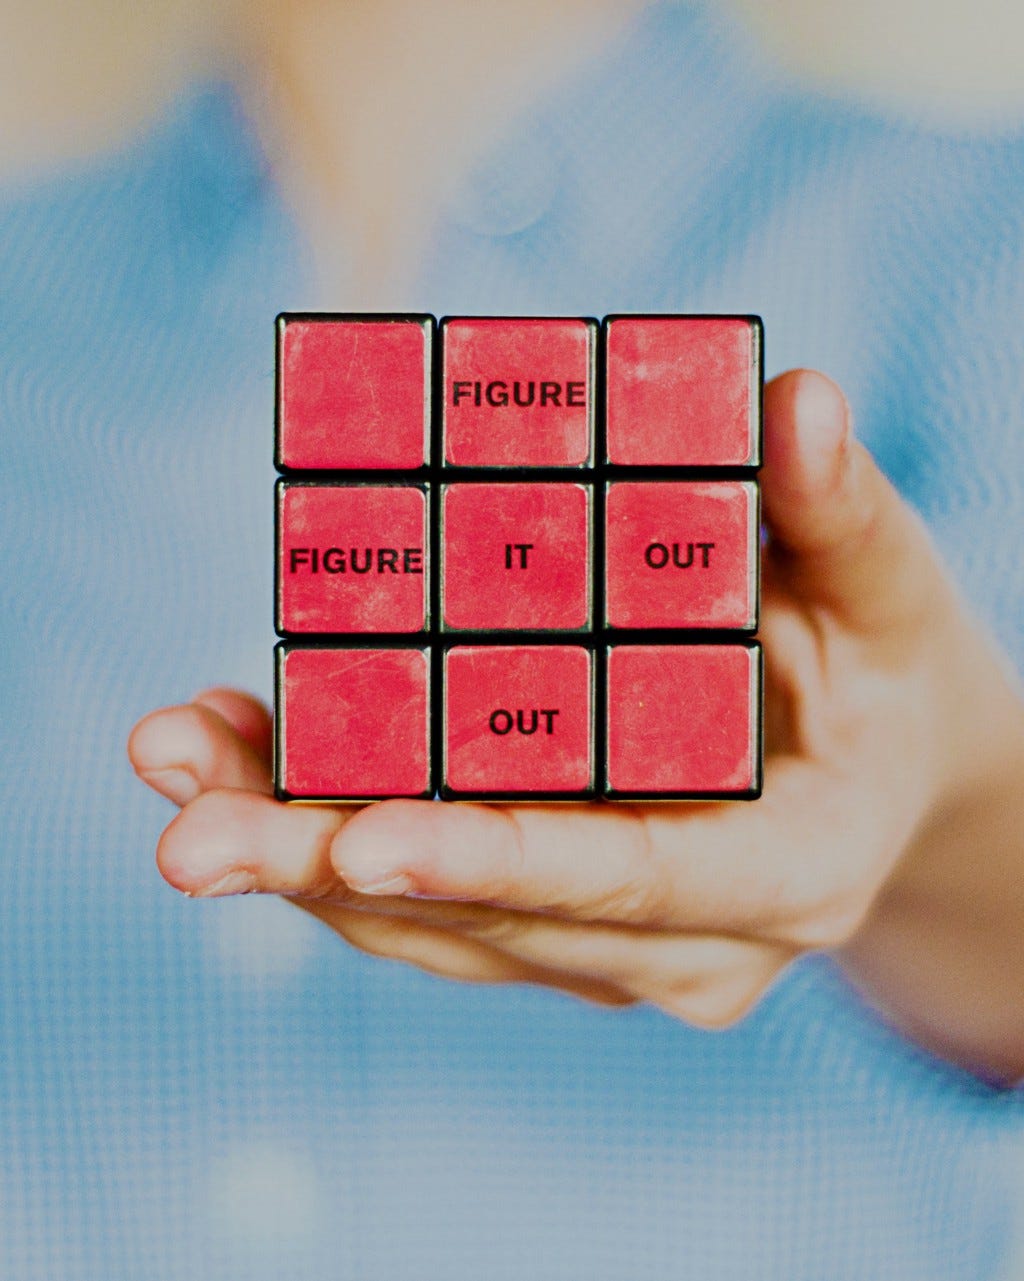 Person holding a solved rubik’s cube with the words “figure it out”.